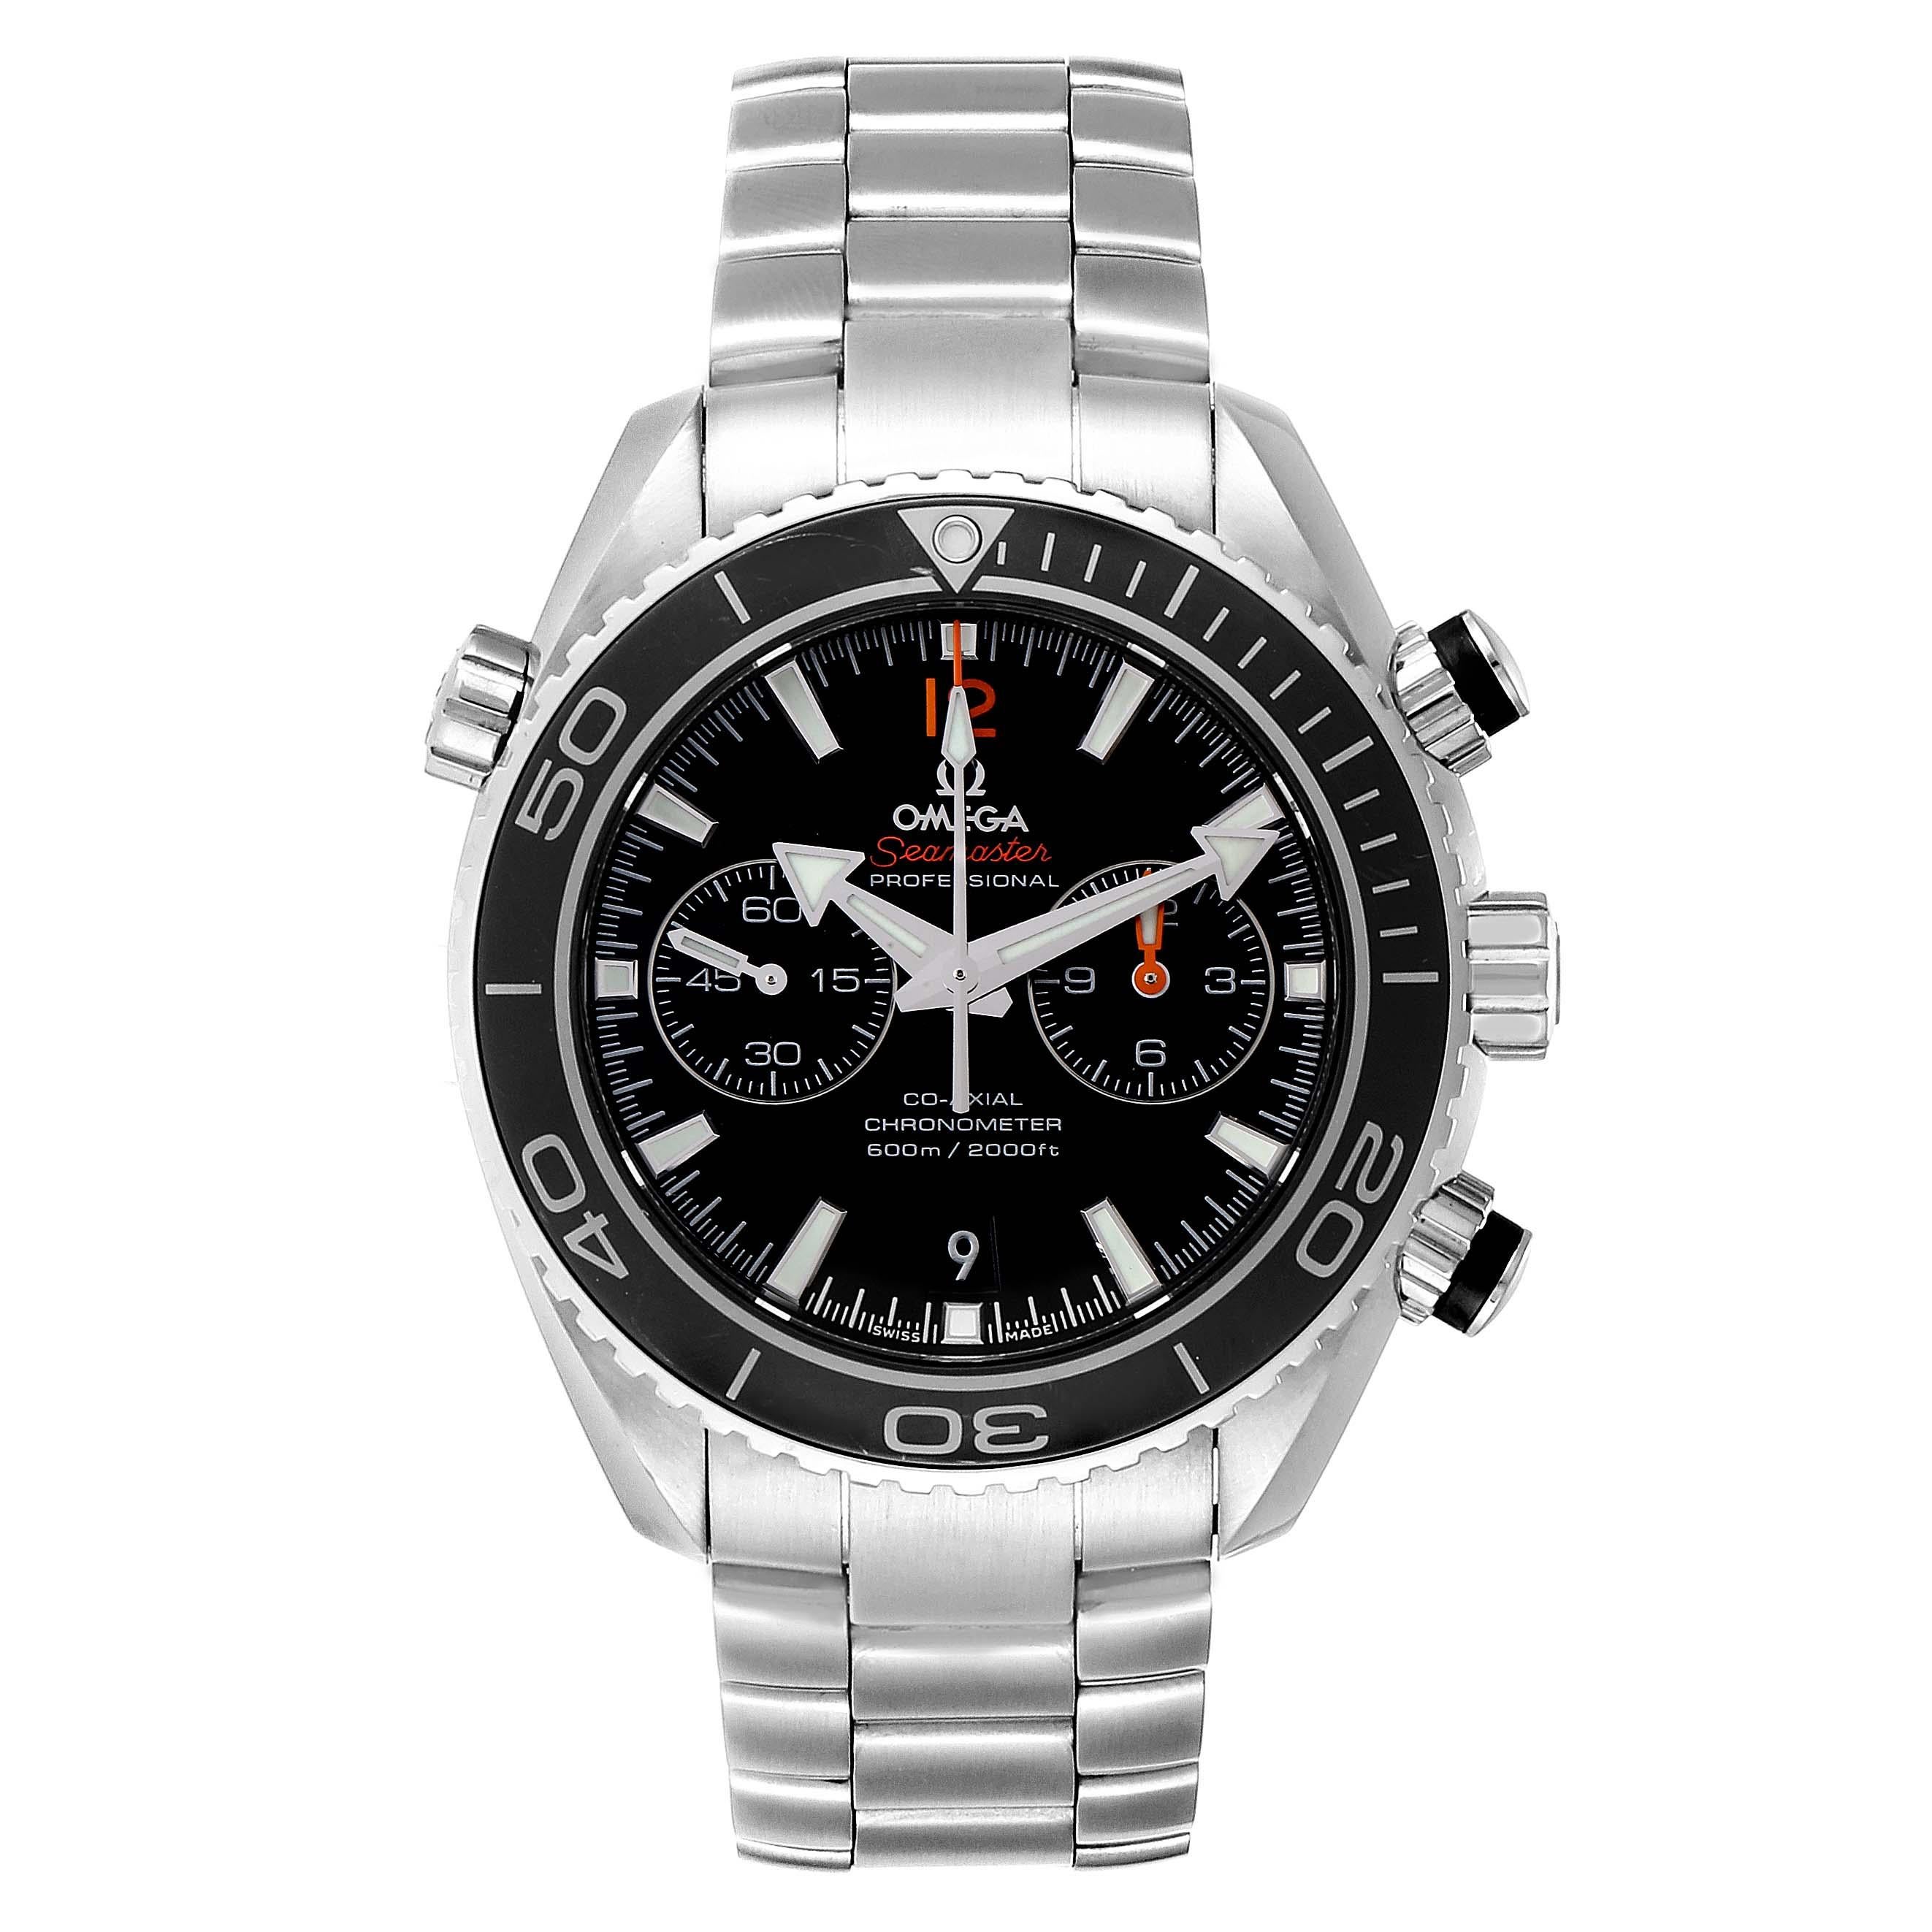 Omega Seamaster Planet Ocean Mens Watch 232.30.46.51.01.003 Box Card. Automatic self-winding chronograph movement with column wheel mechanism and Co-Axial Escapement for greater precision, stability and durability of the movement. Silicon